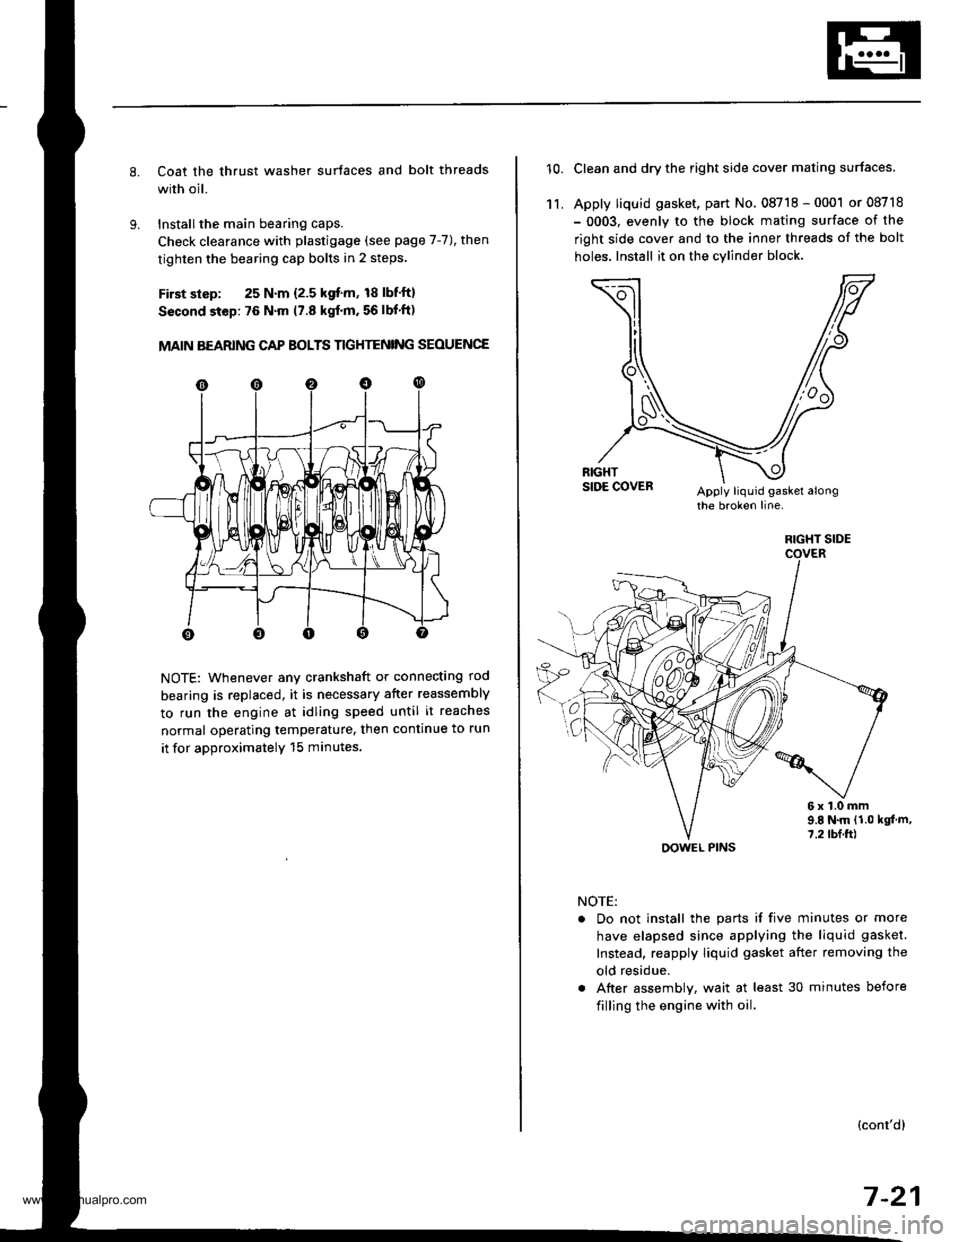 HONDA CR-V 1998 RD1-RD3 / 1.G Workshop Manual 
Coat the thrust washer surtaces and bolt threads
with oil.
Installthe main bearing caps.
Check clearance with plastigage (see page 7-7), then
tighten the bearing cap bolts in 2 steps.
First slsp: 25 